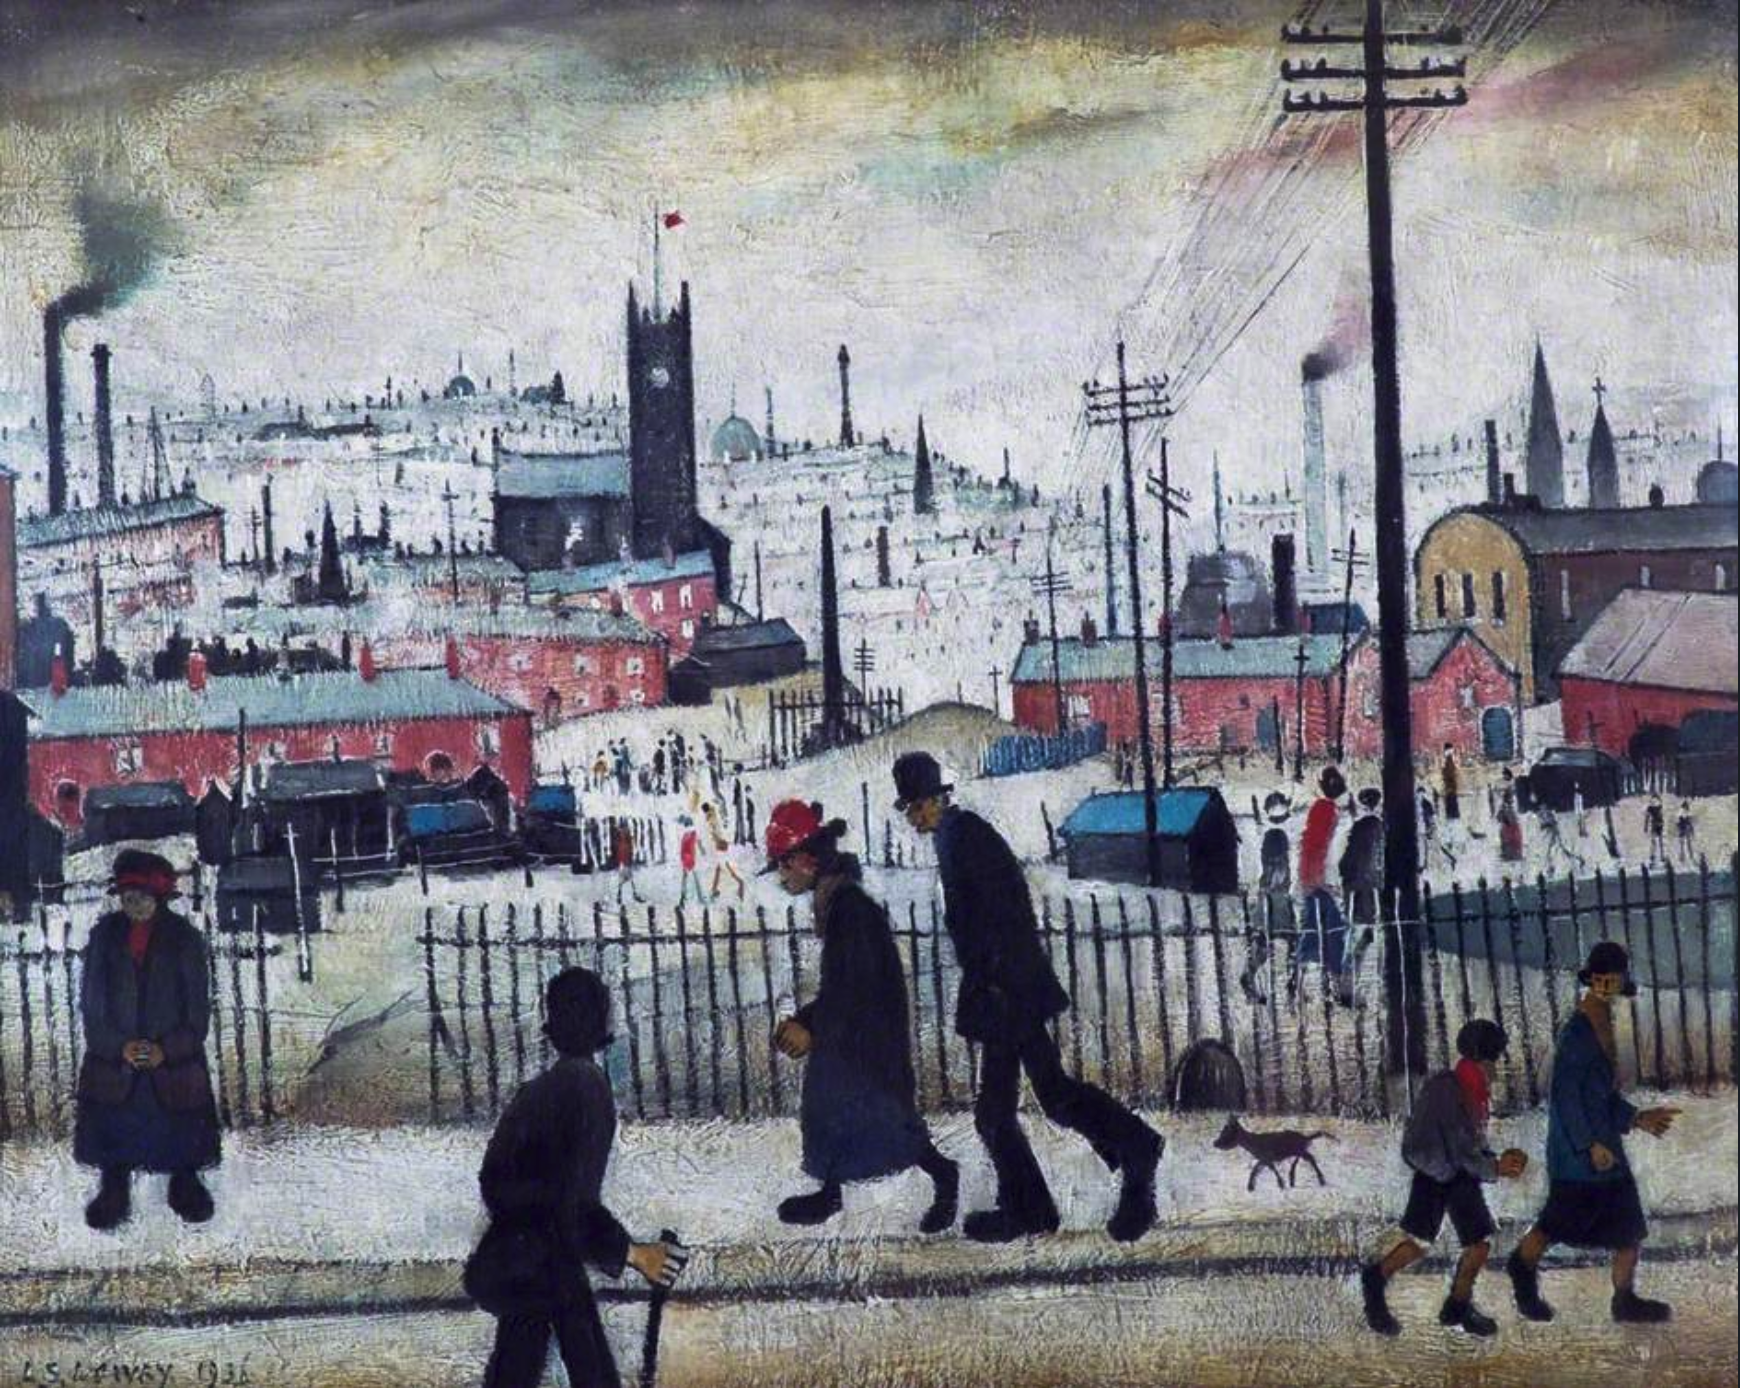 View of a Town (1936) by Laurence Stephen Lowry (1887 - 1976), English artist.